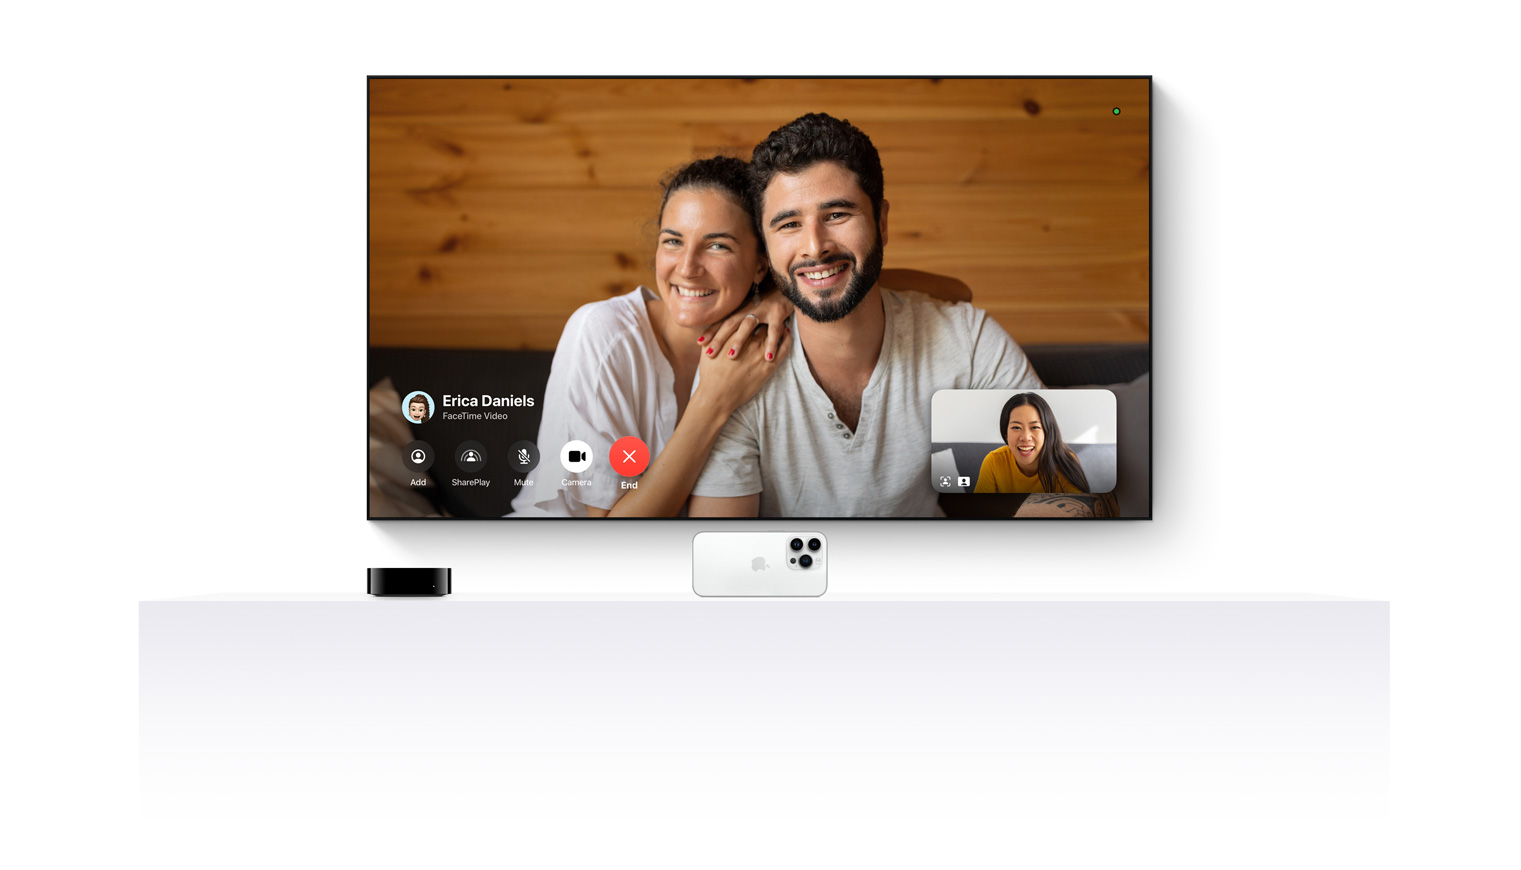 Apple TV 4K and an iPhone working together to bring FaceTime to a flat-screen television